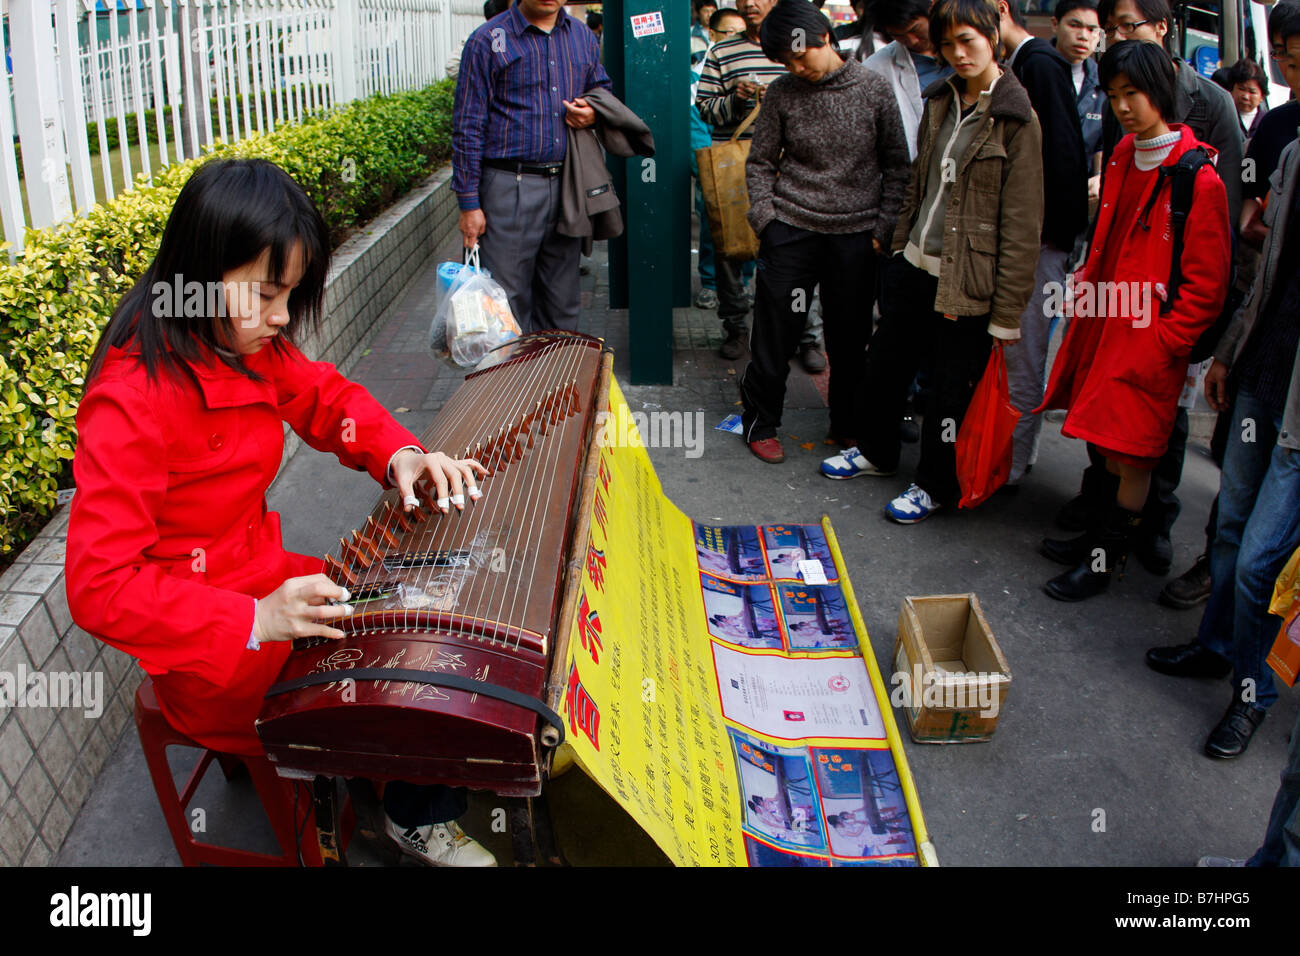 Teacher playing music on street in hopes to find private students as Chinese Economy worsens Stock Photo